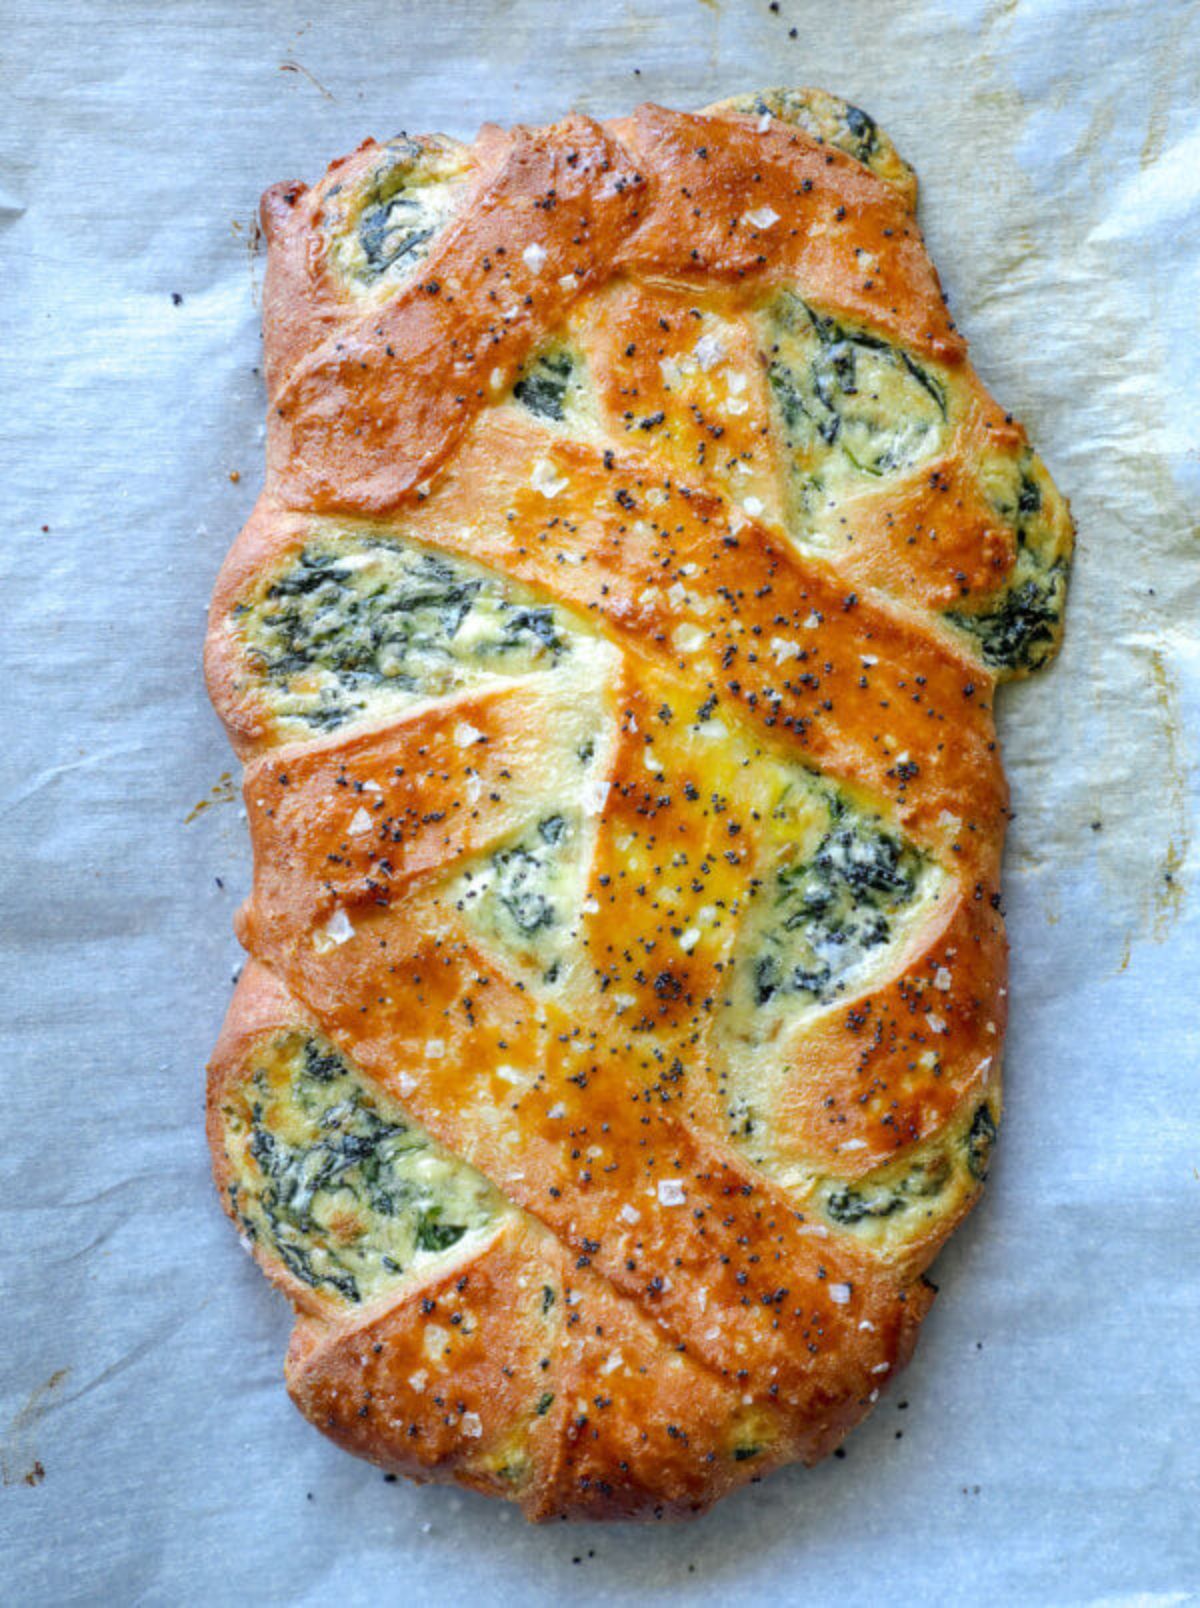 On a sheet of baking parchment is a calzone with spinach sneaking thorugh the layers.